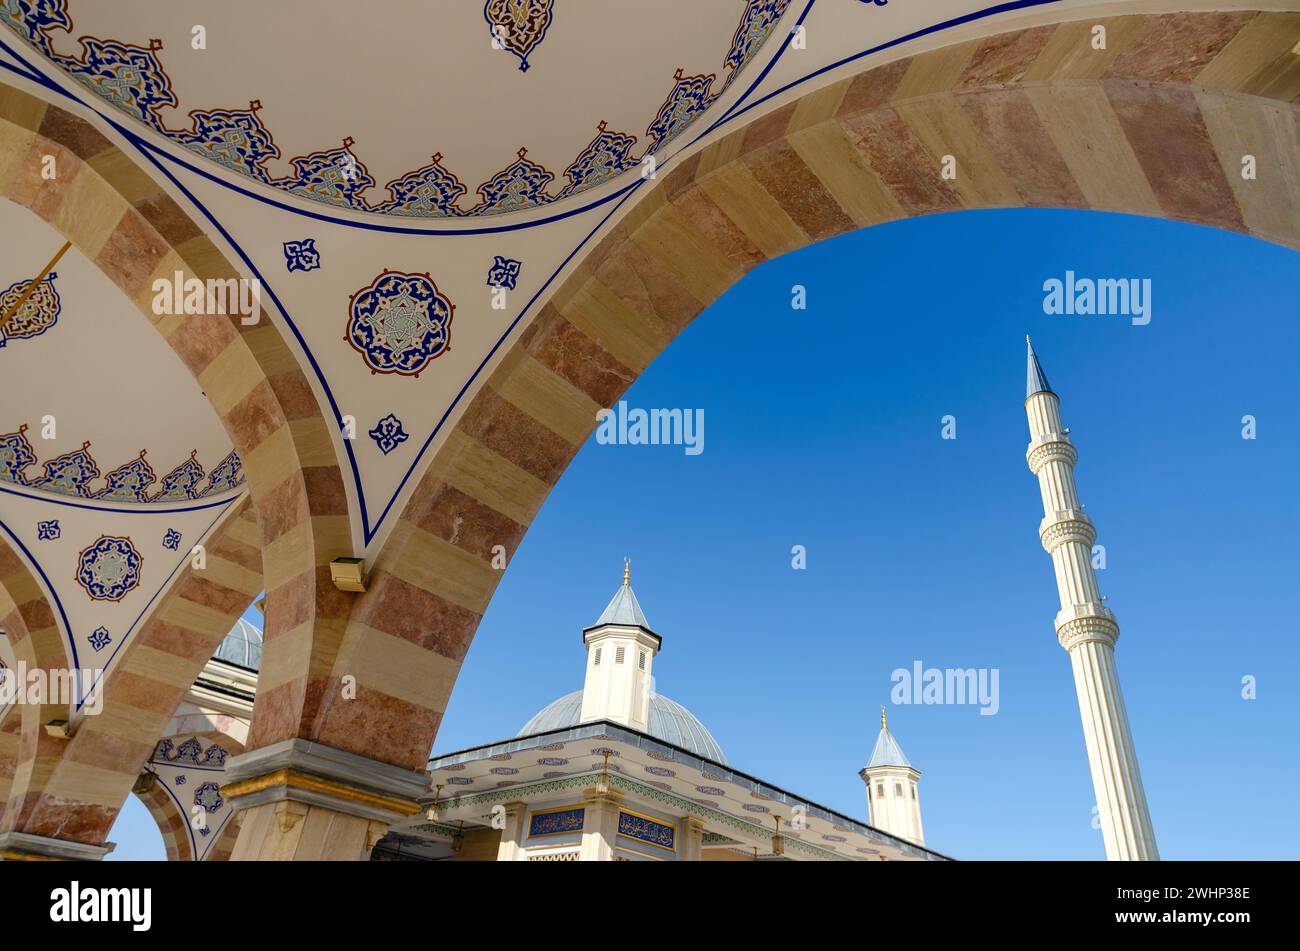 Minaret of traditional Islamic mosque in Grozny Chechnya Russia Stock Photo